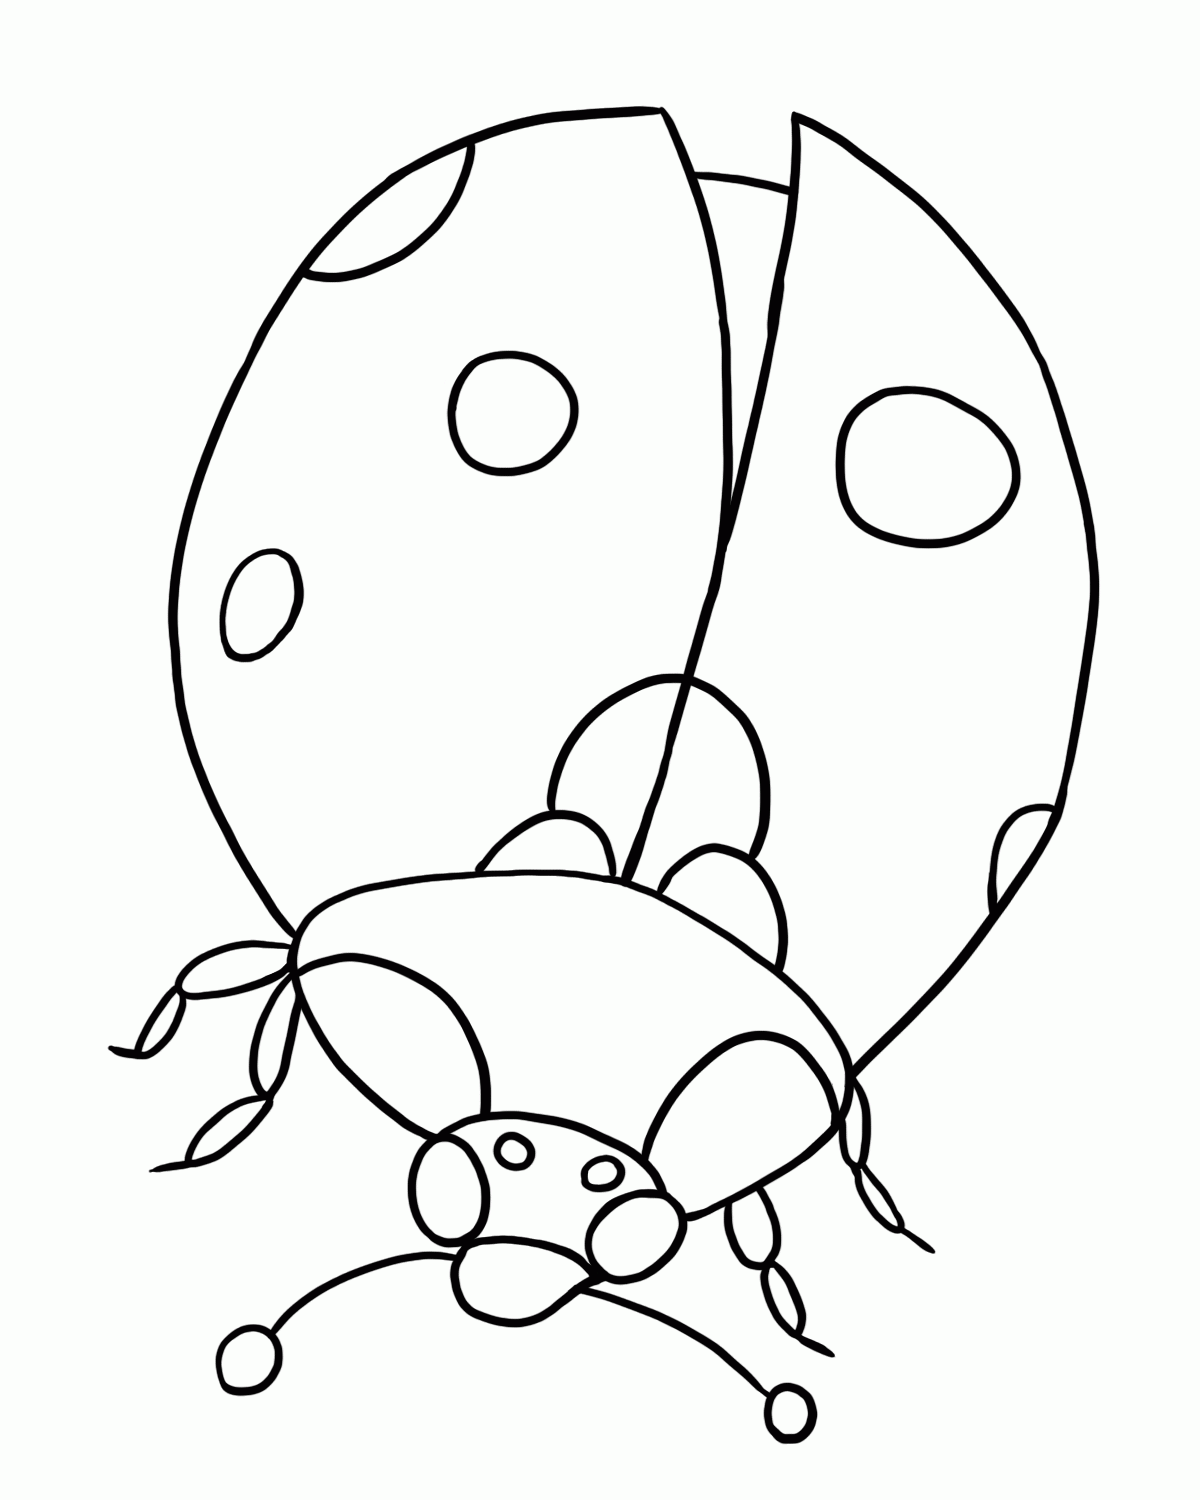 Printable Ladybug Coloring Pages | Coloring Me